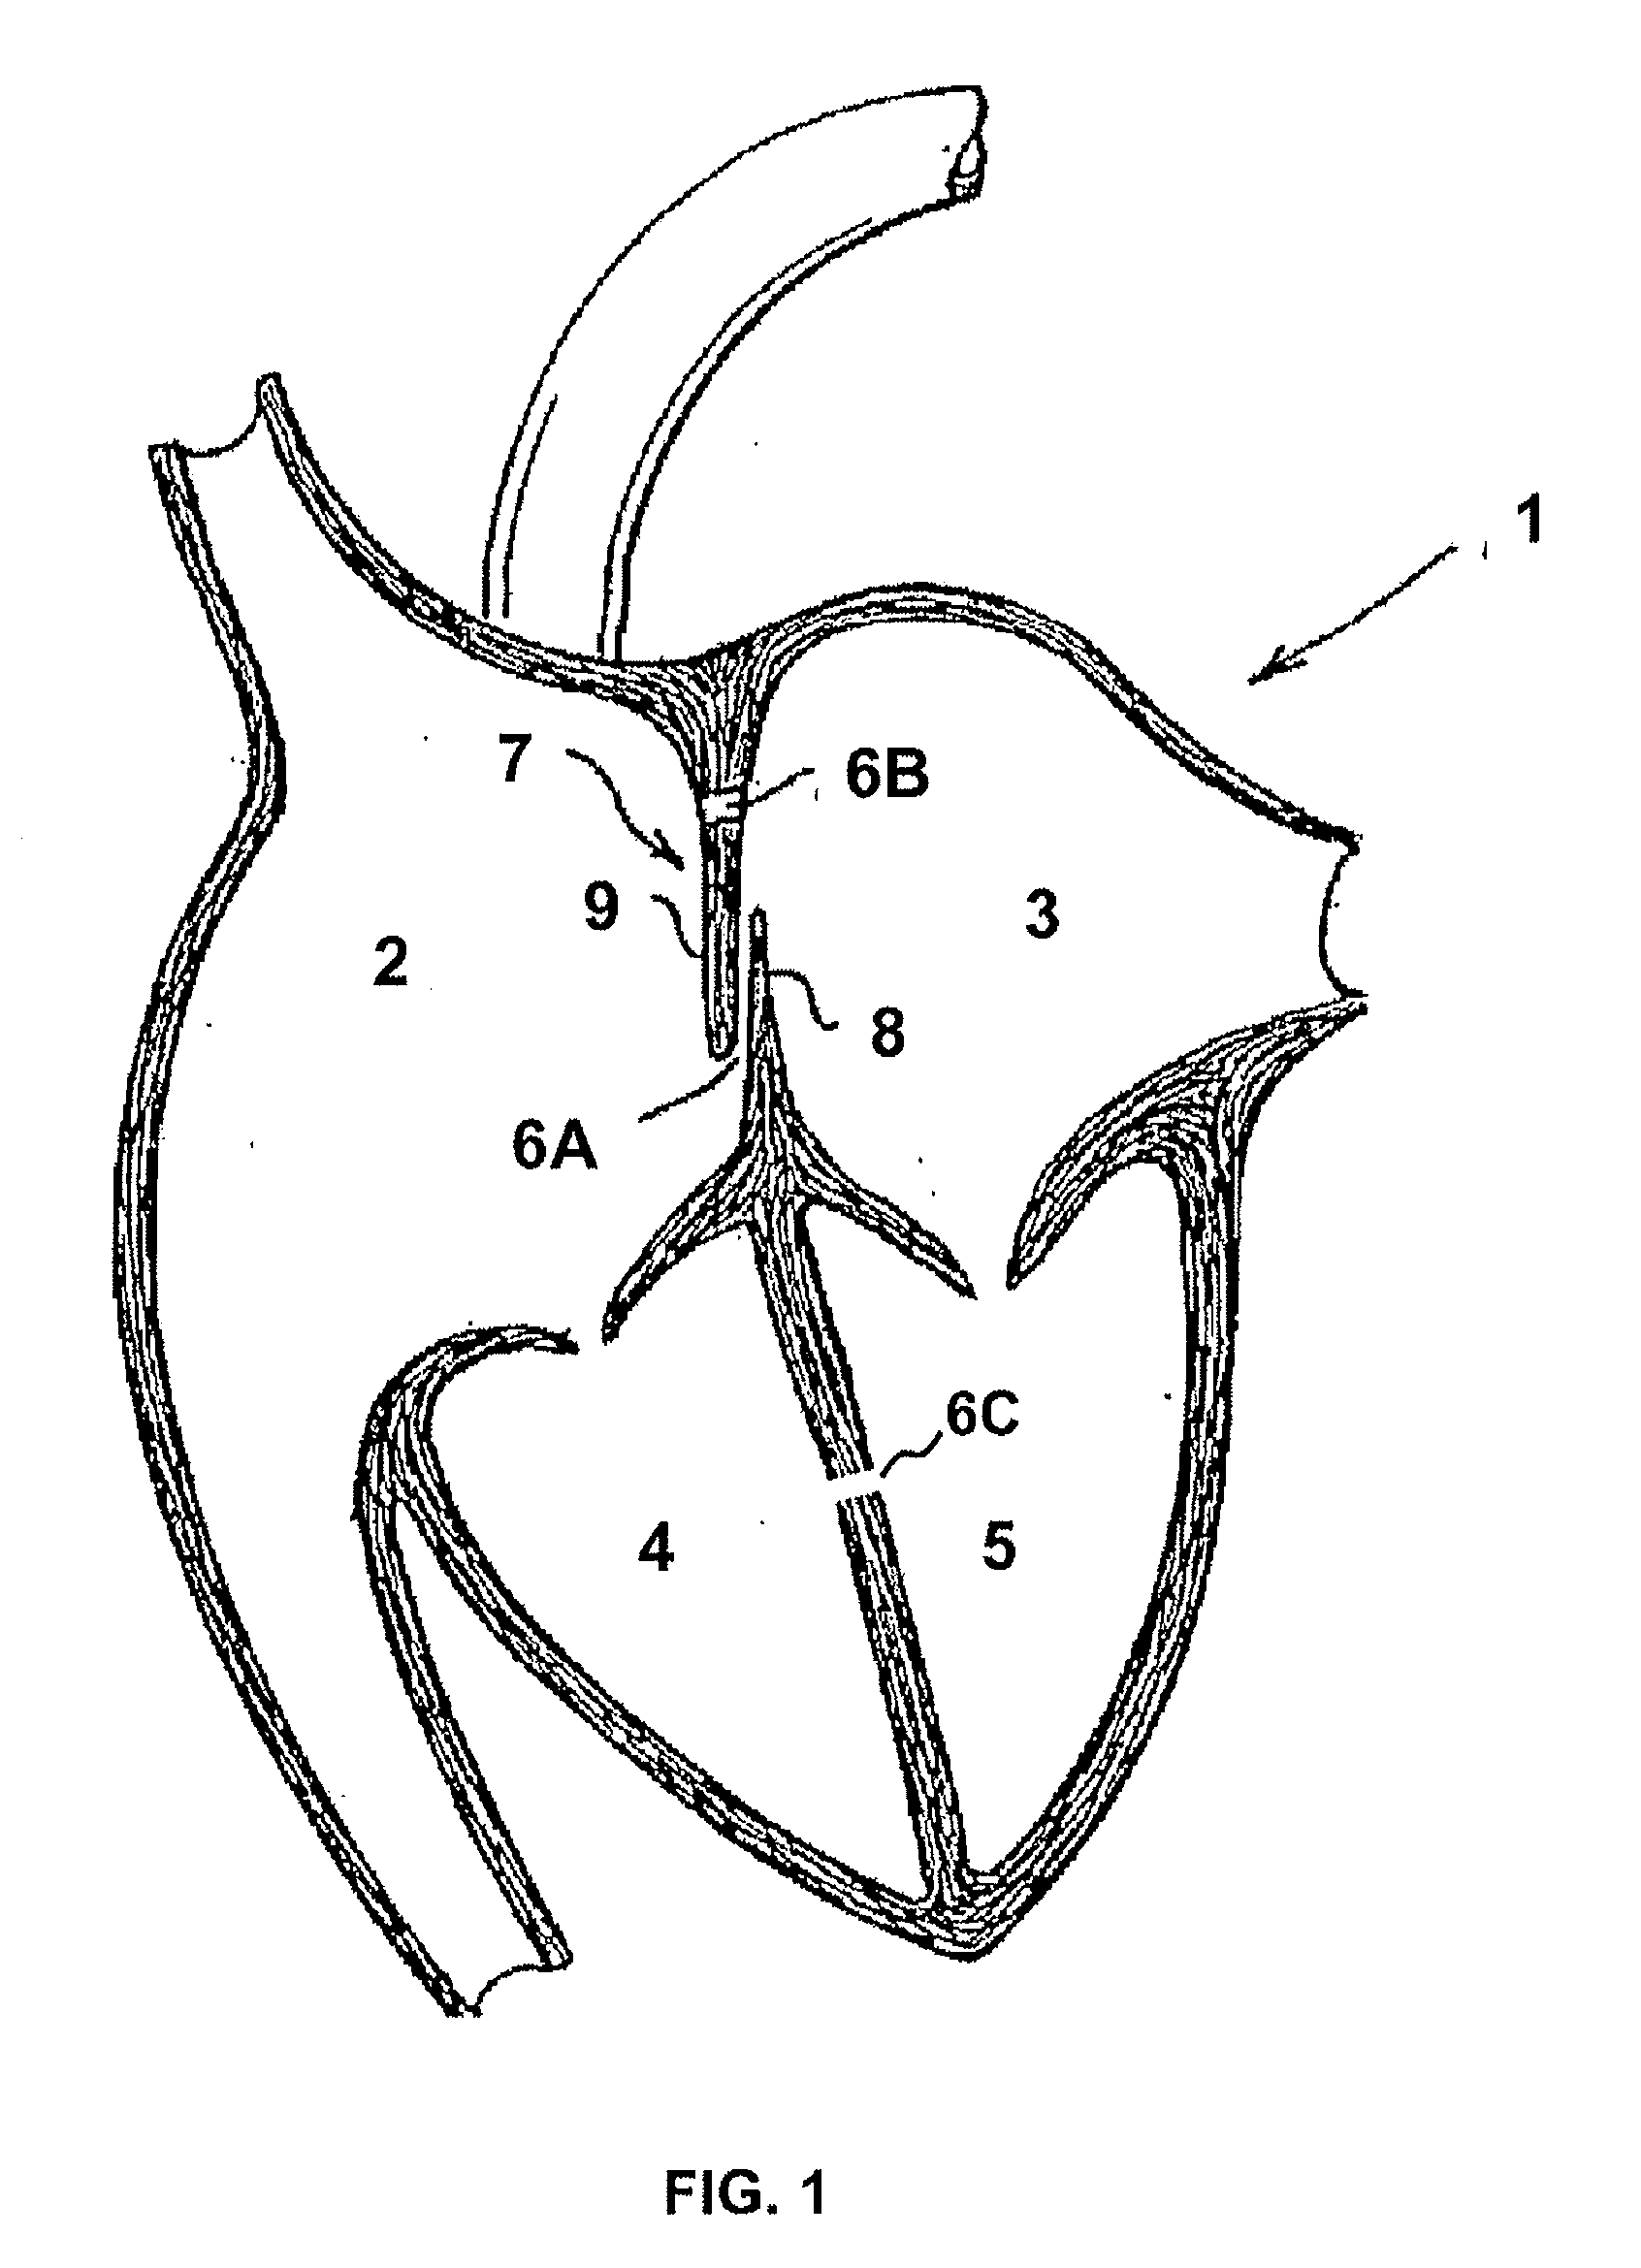 Heart occlusion devices